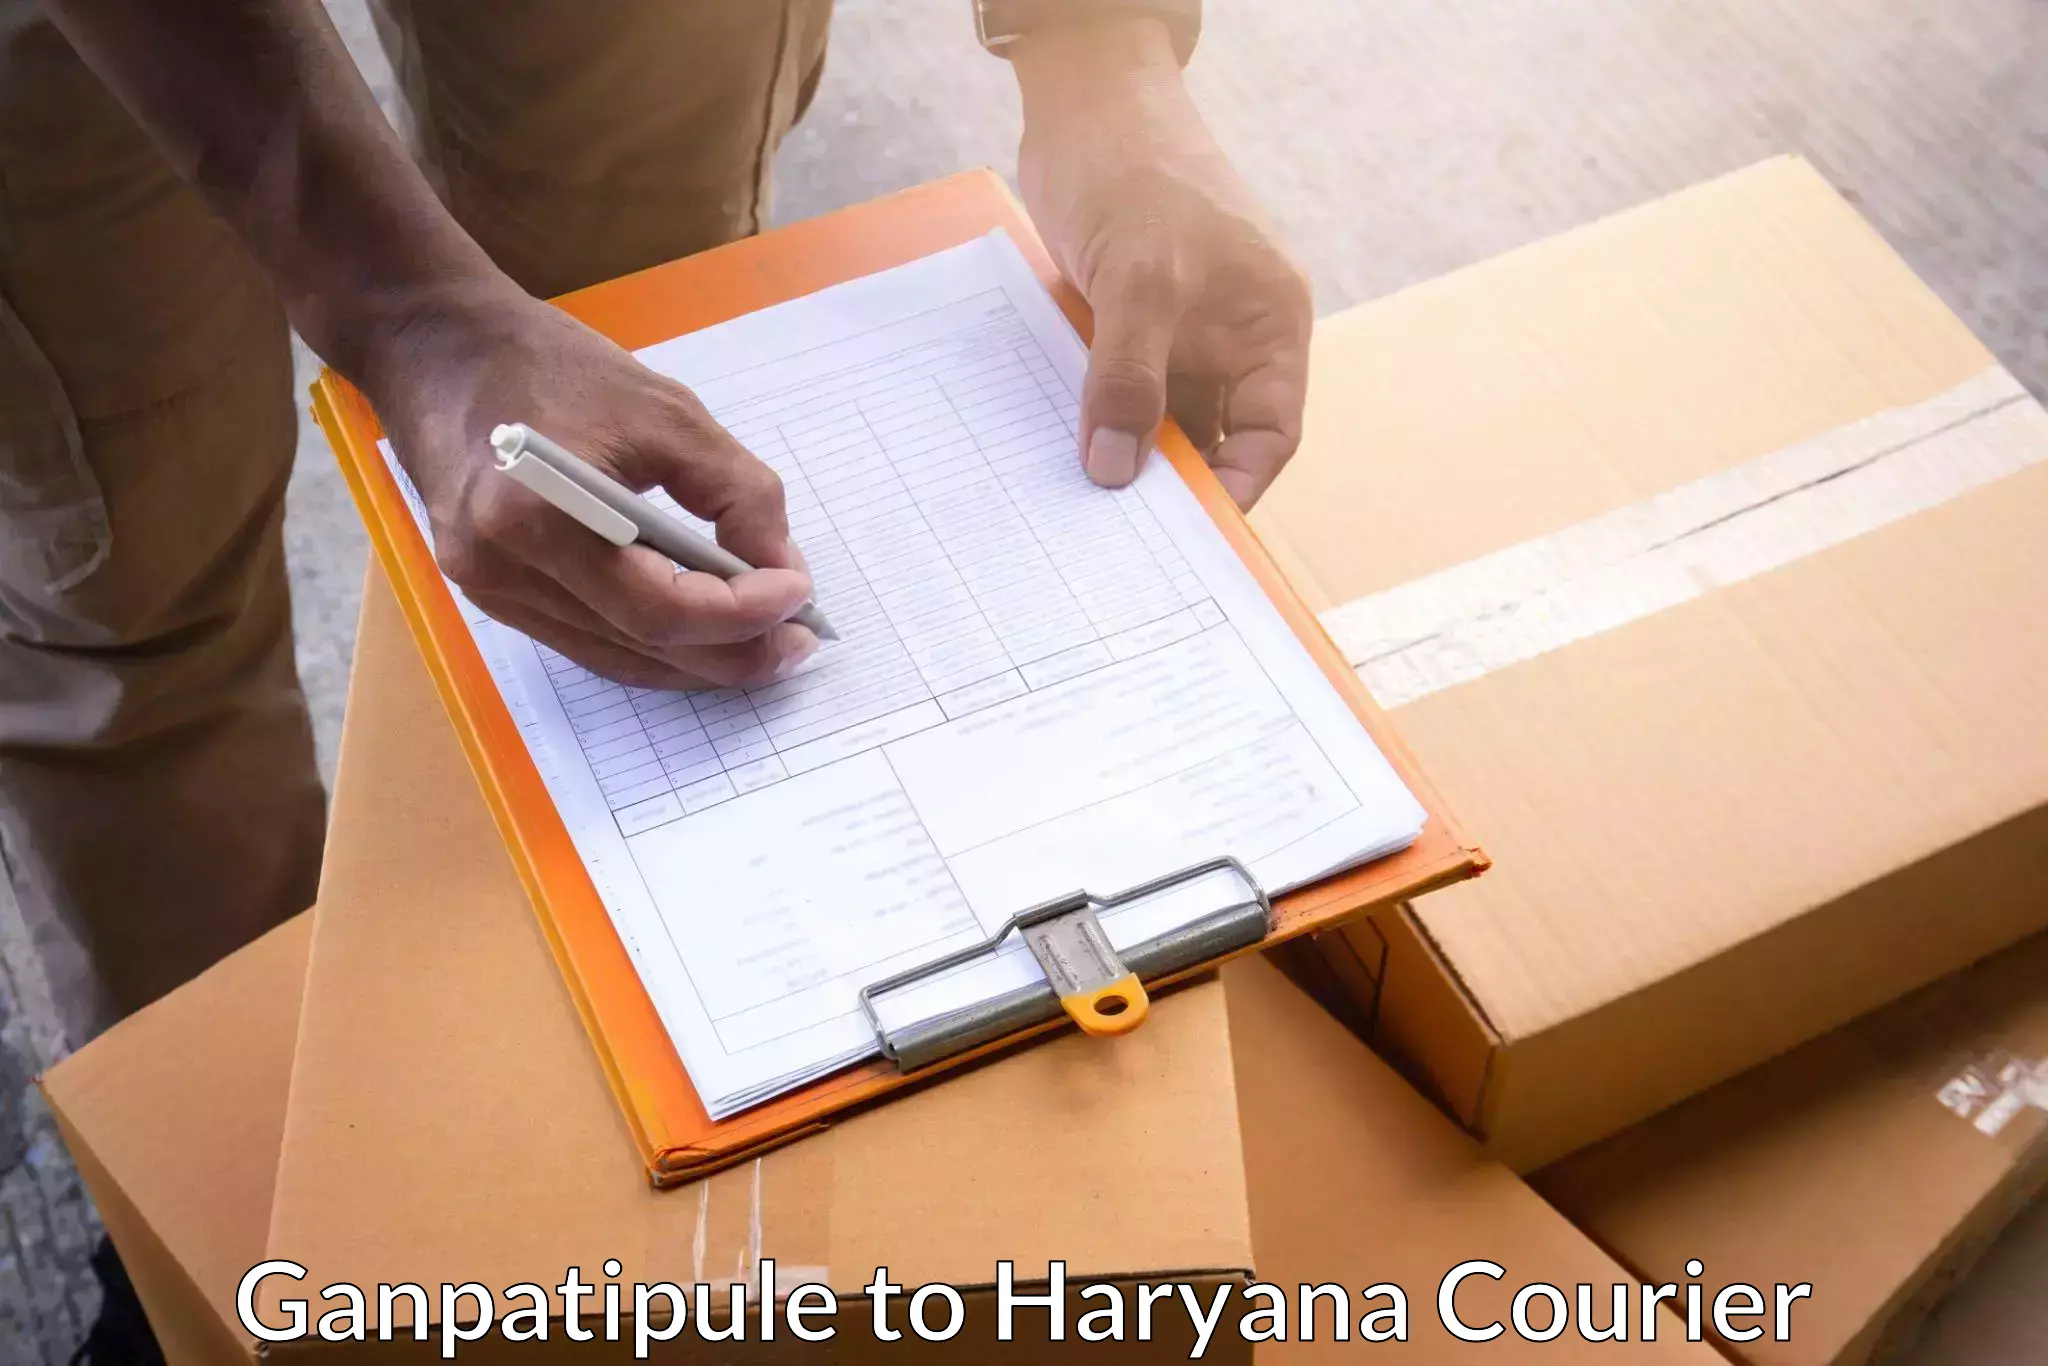 Express delivery capabilities in Ganpatipule to Gurgaon